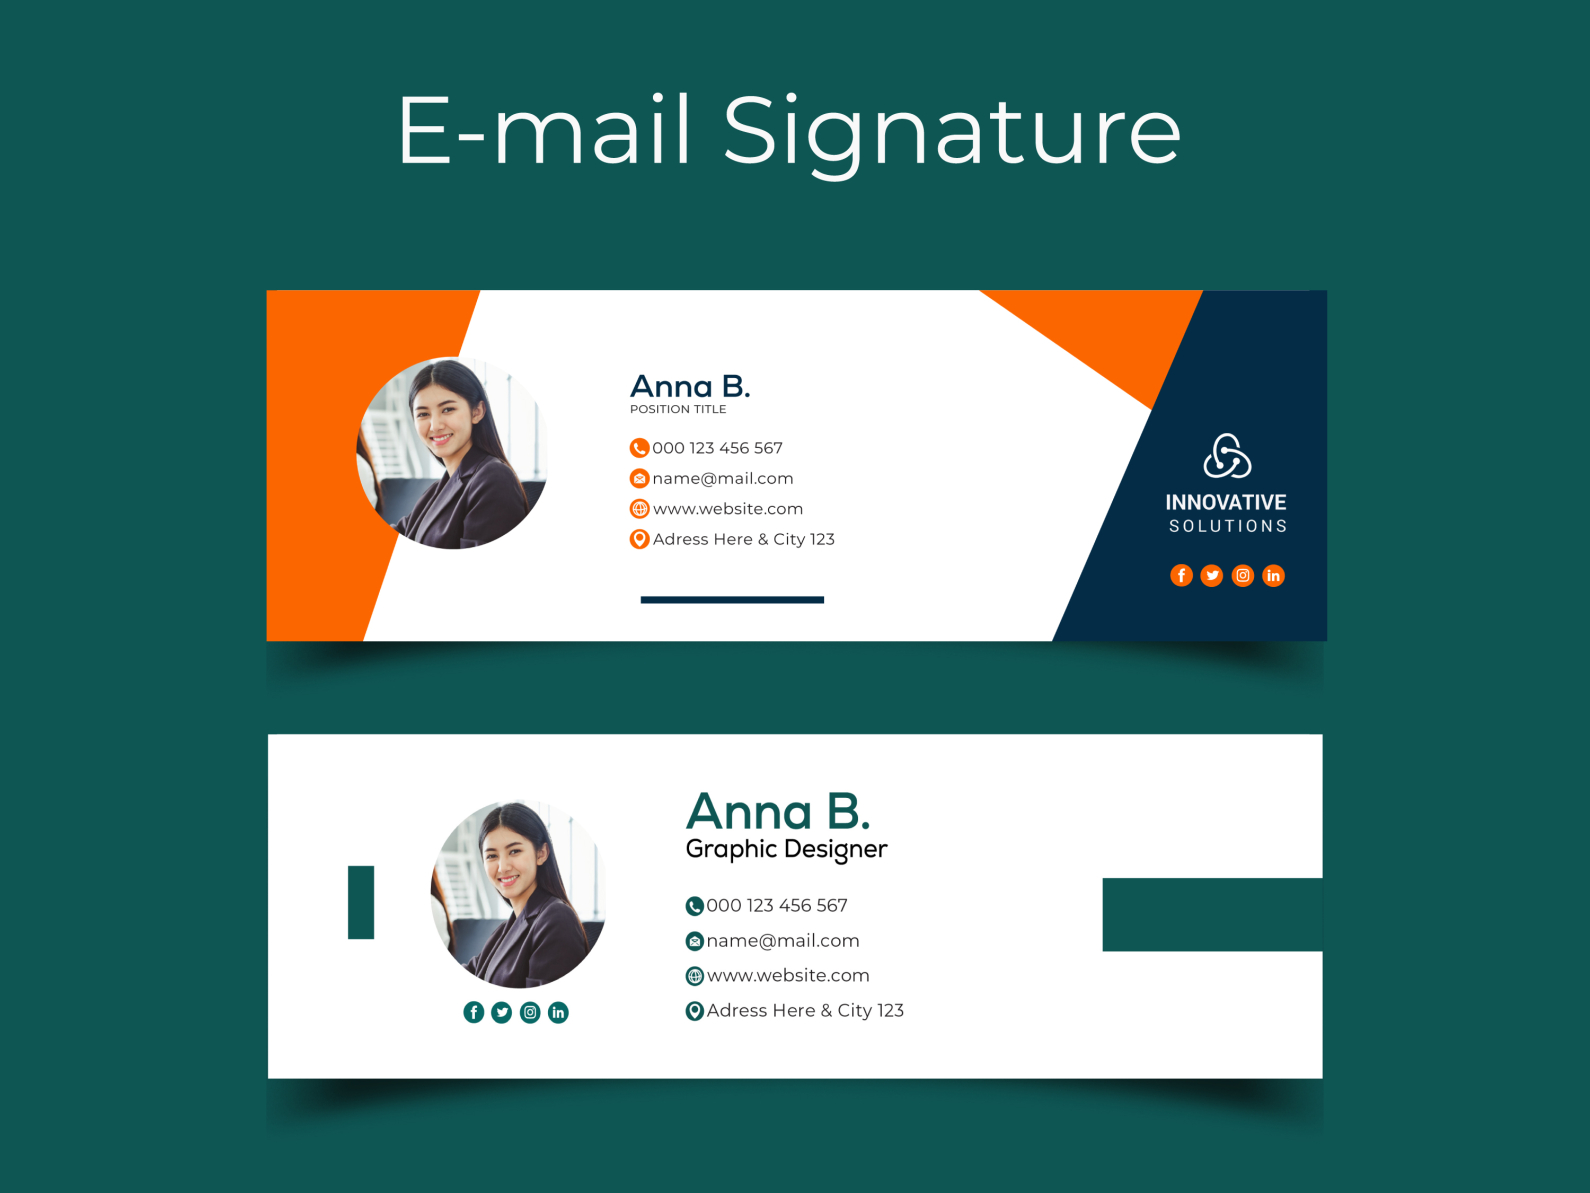 e-mail-signature-template-by-sayela-ahmed-on-dribbble